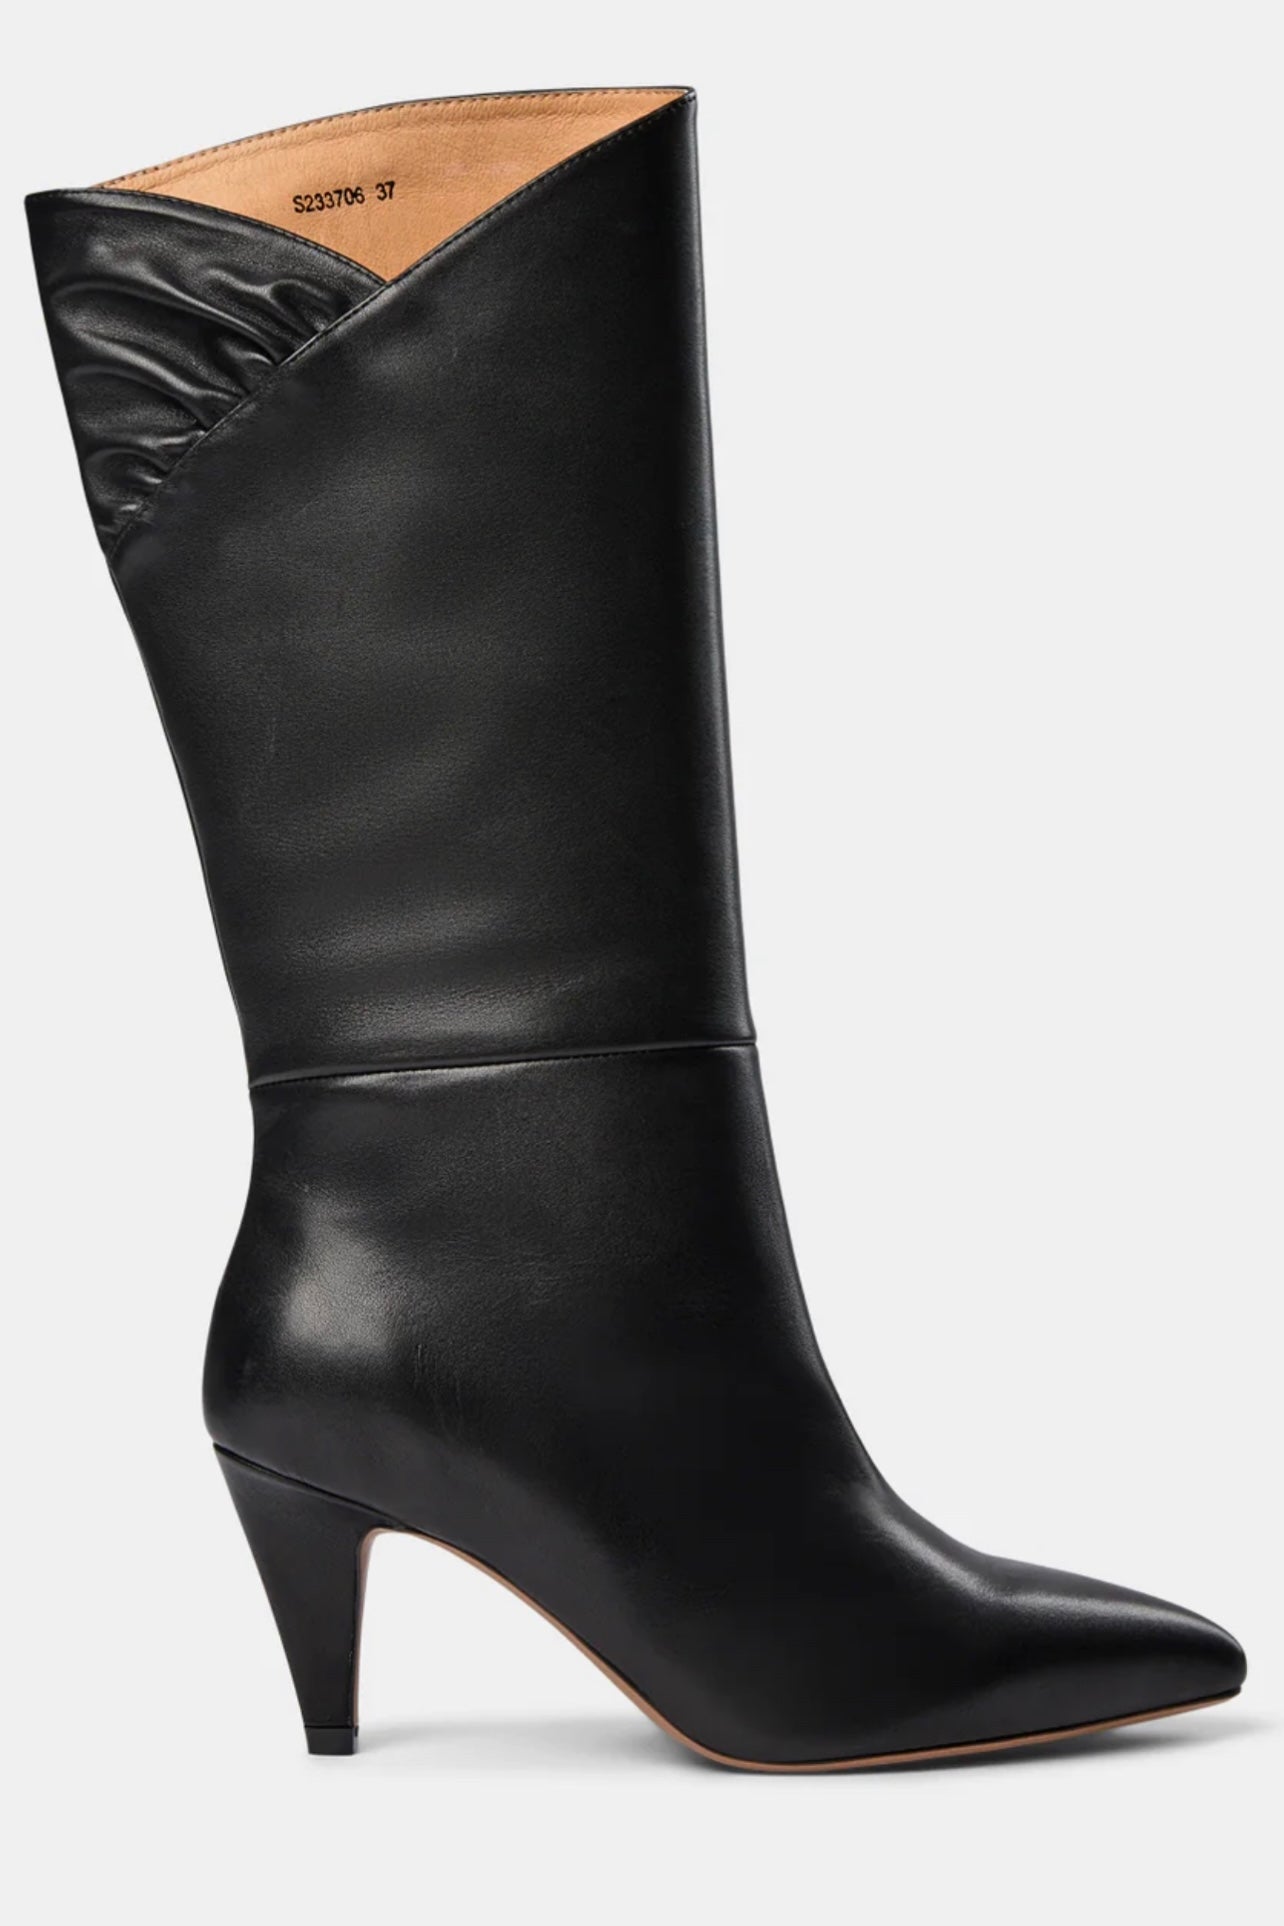 Vince Camuto Sangeti Tall Leather Boot | HSN